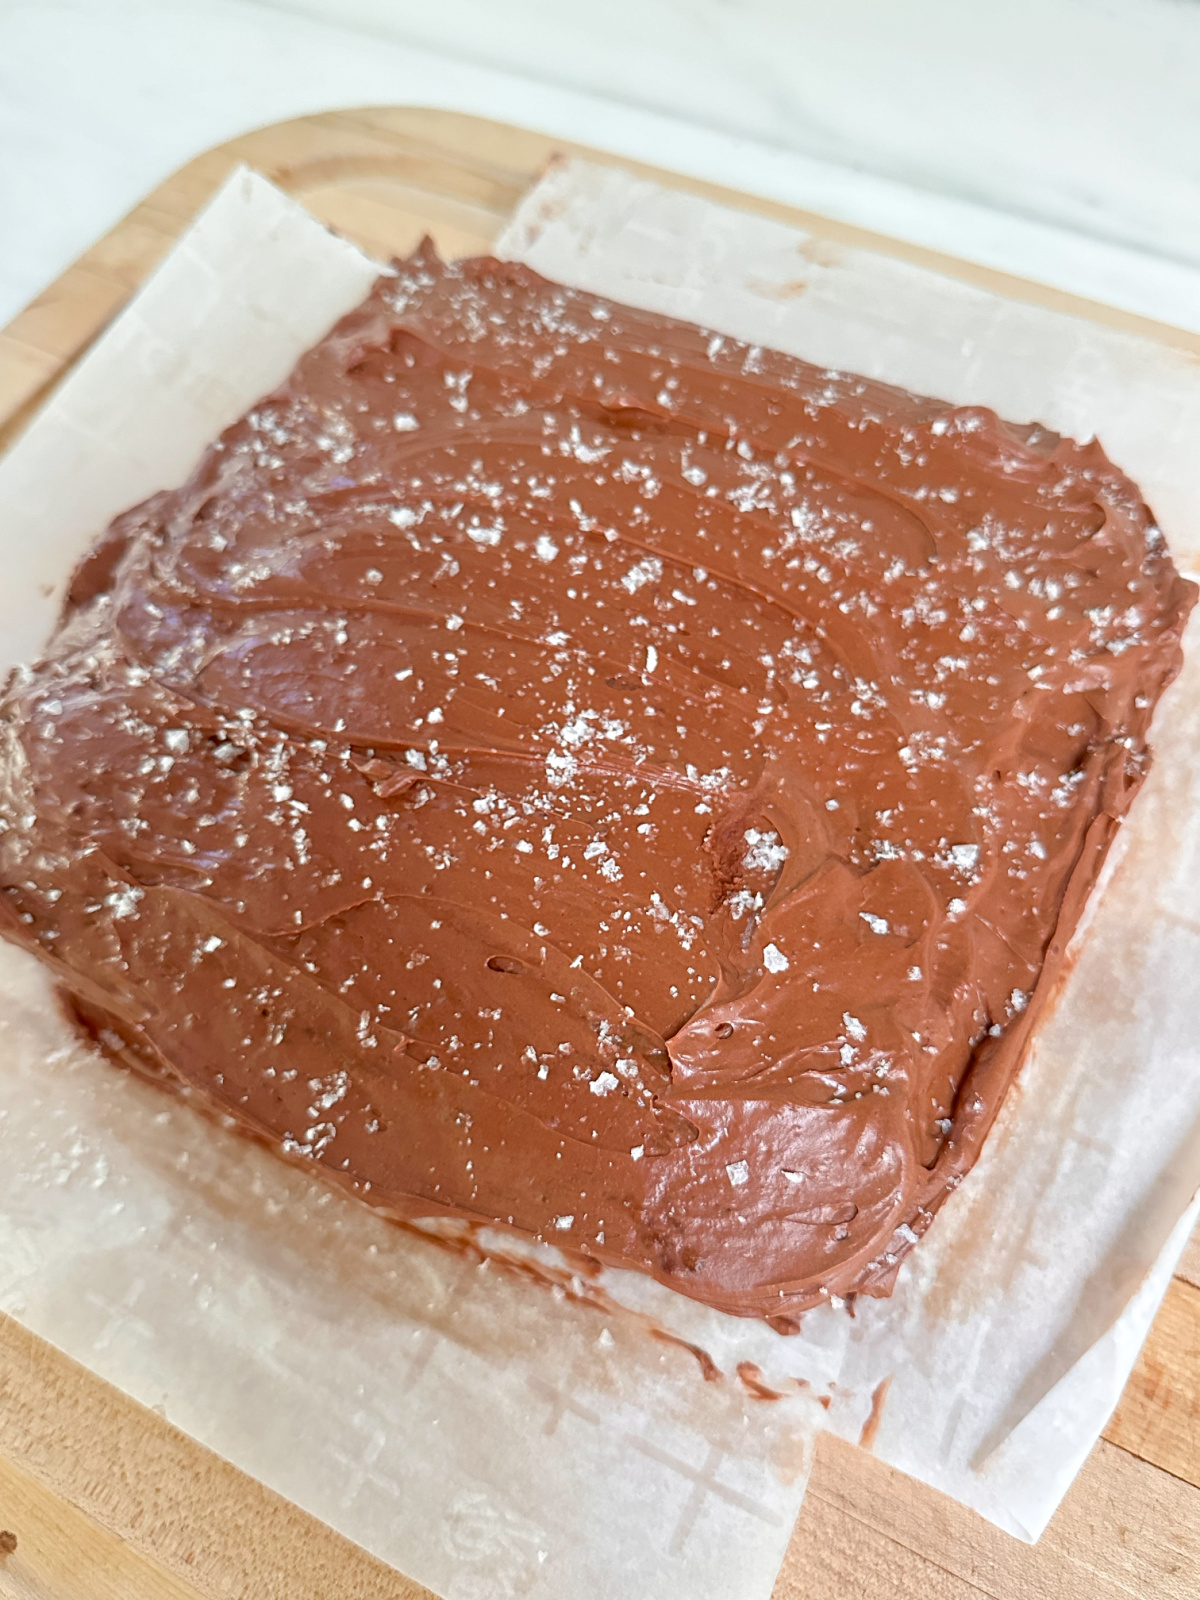 Banana cake with chocolate frosting and sea salt sitting on parchment sheets.